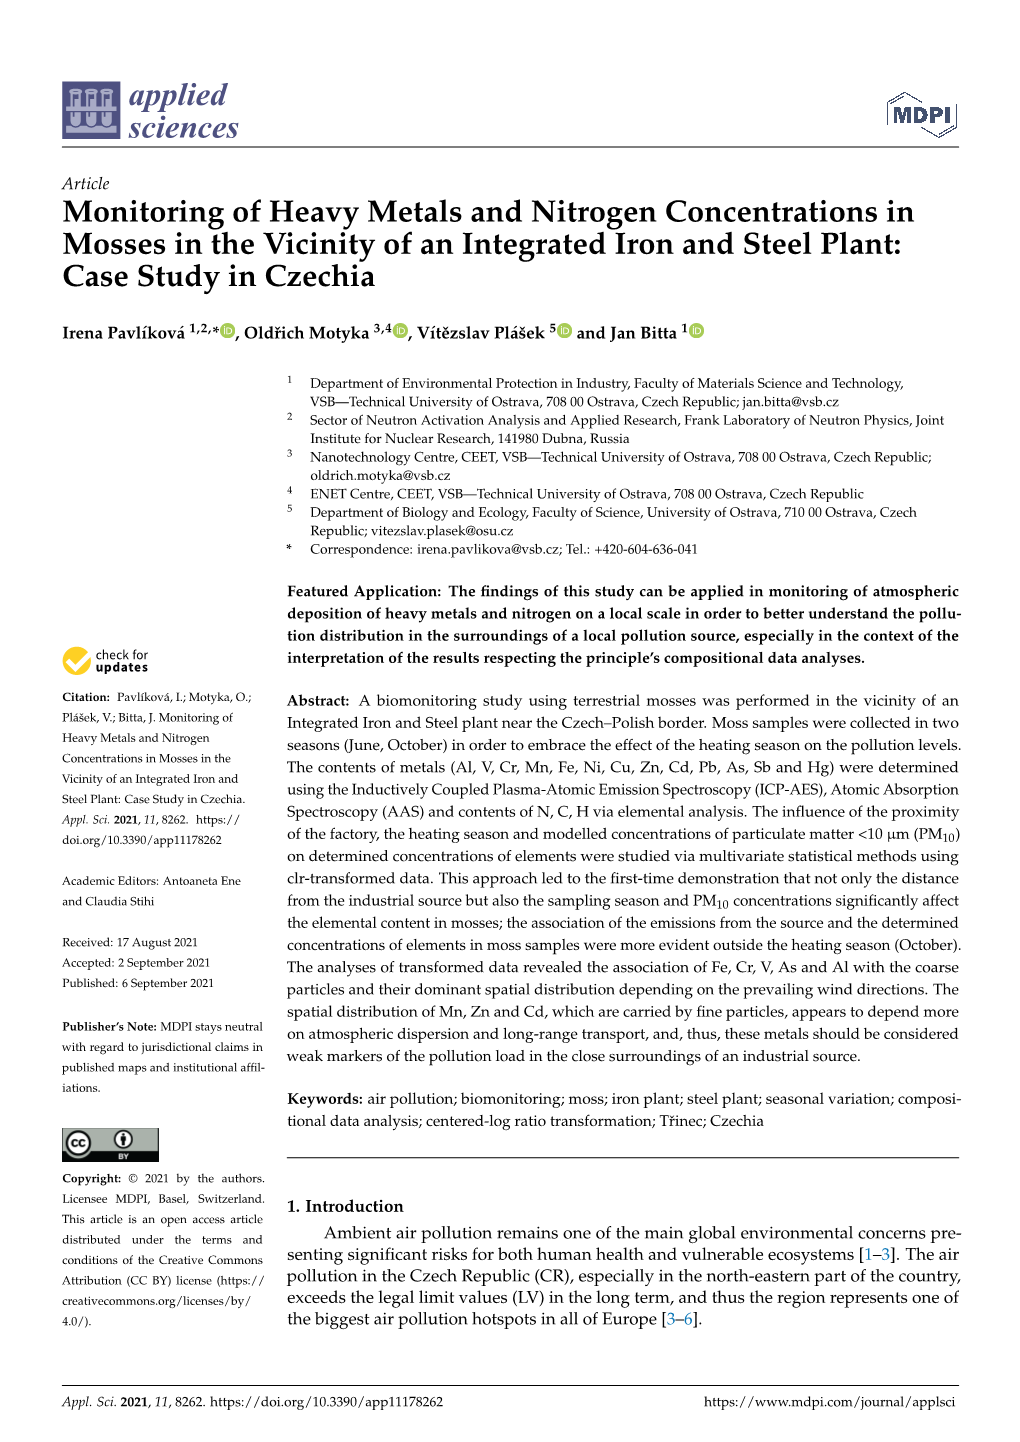 Monitoring of Heavy Metals and Nitrogen Concentrations in Mosses in the Vicinity of an Integrated Iron and Steel Plant: Case Study in Czechia